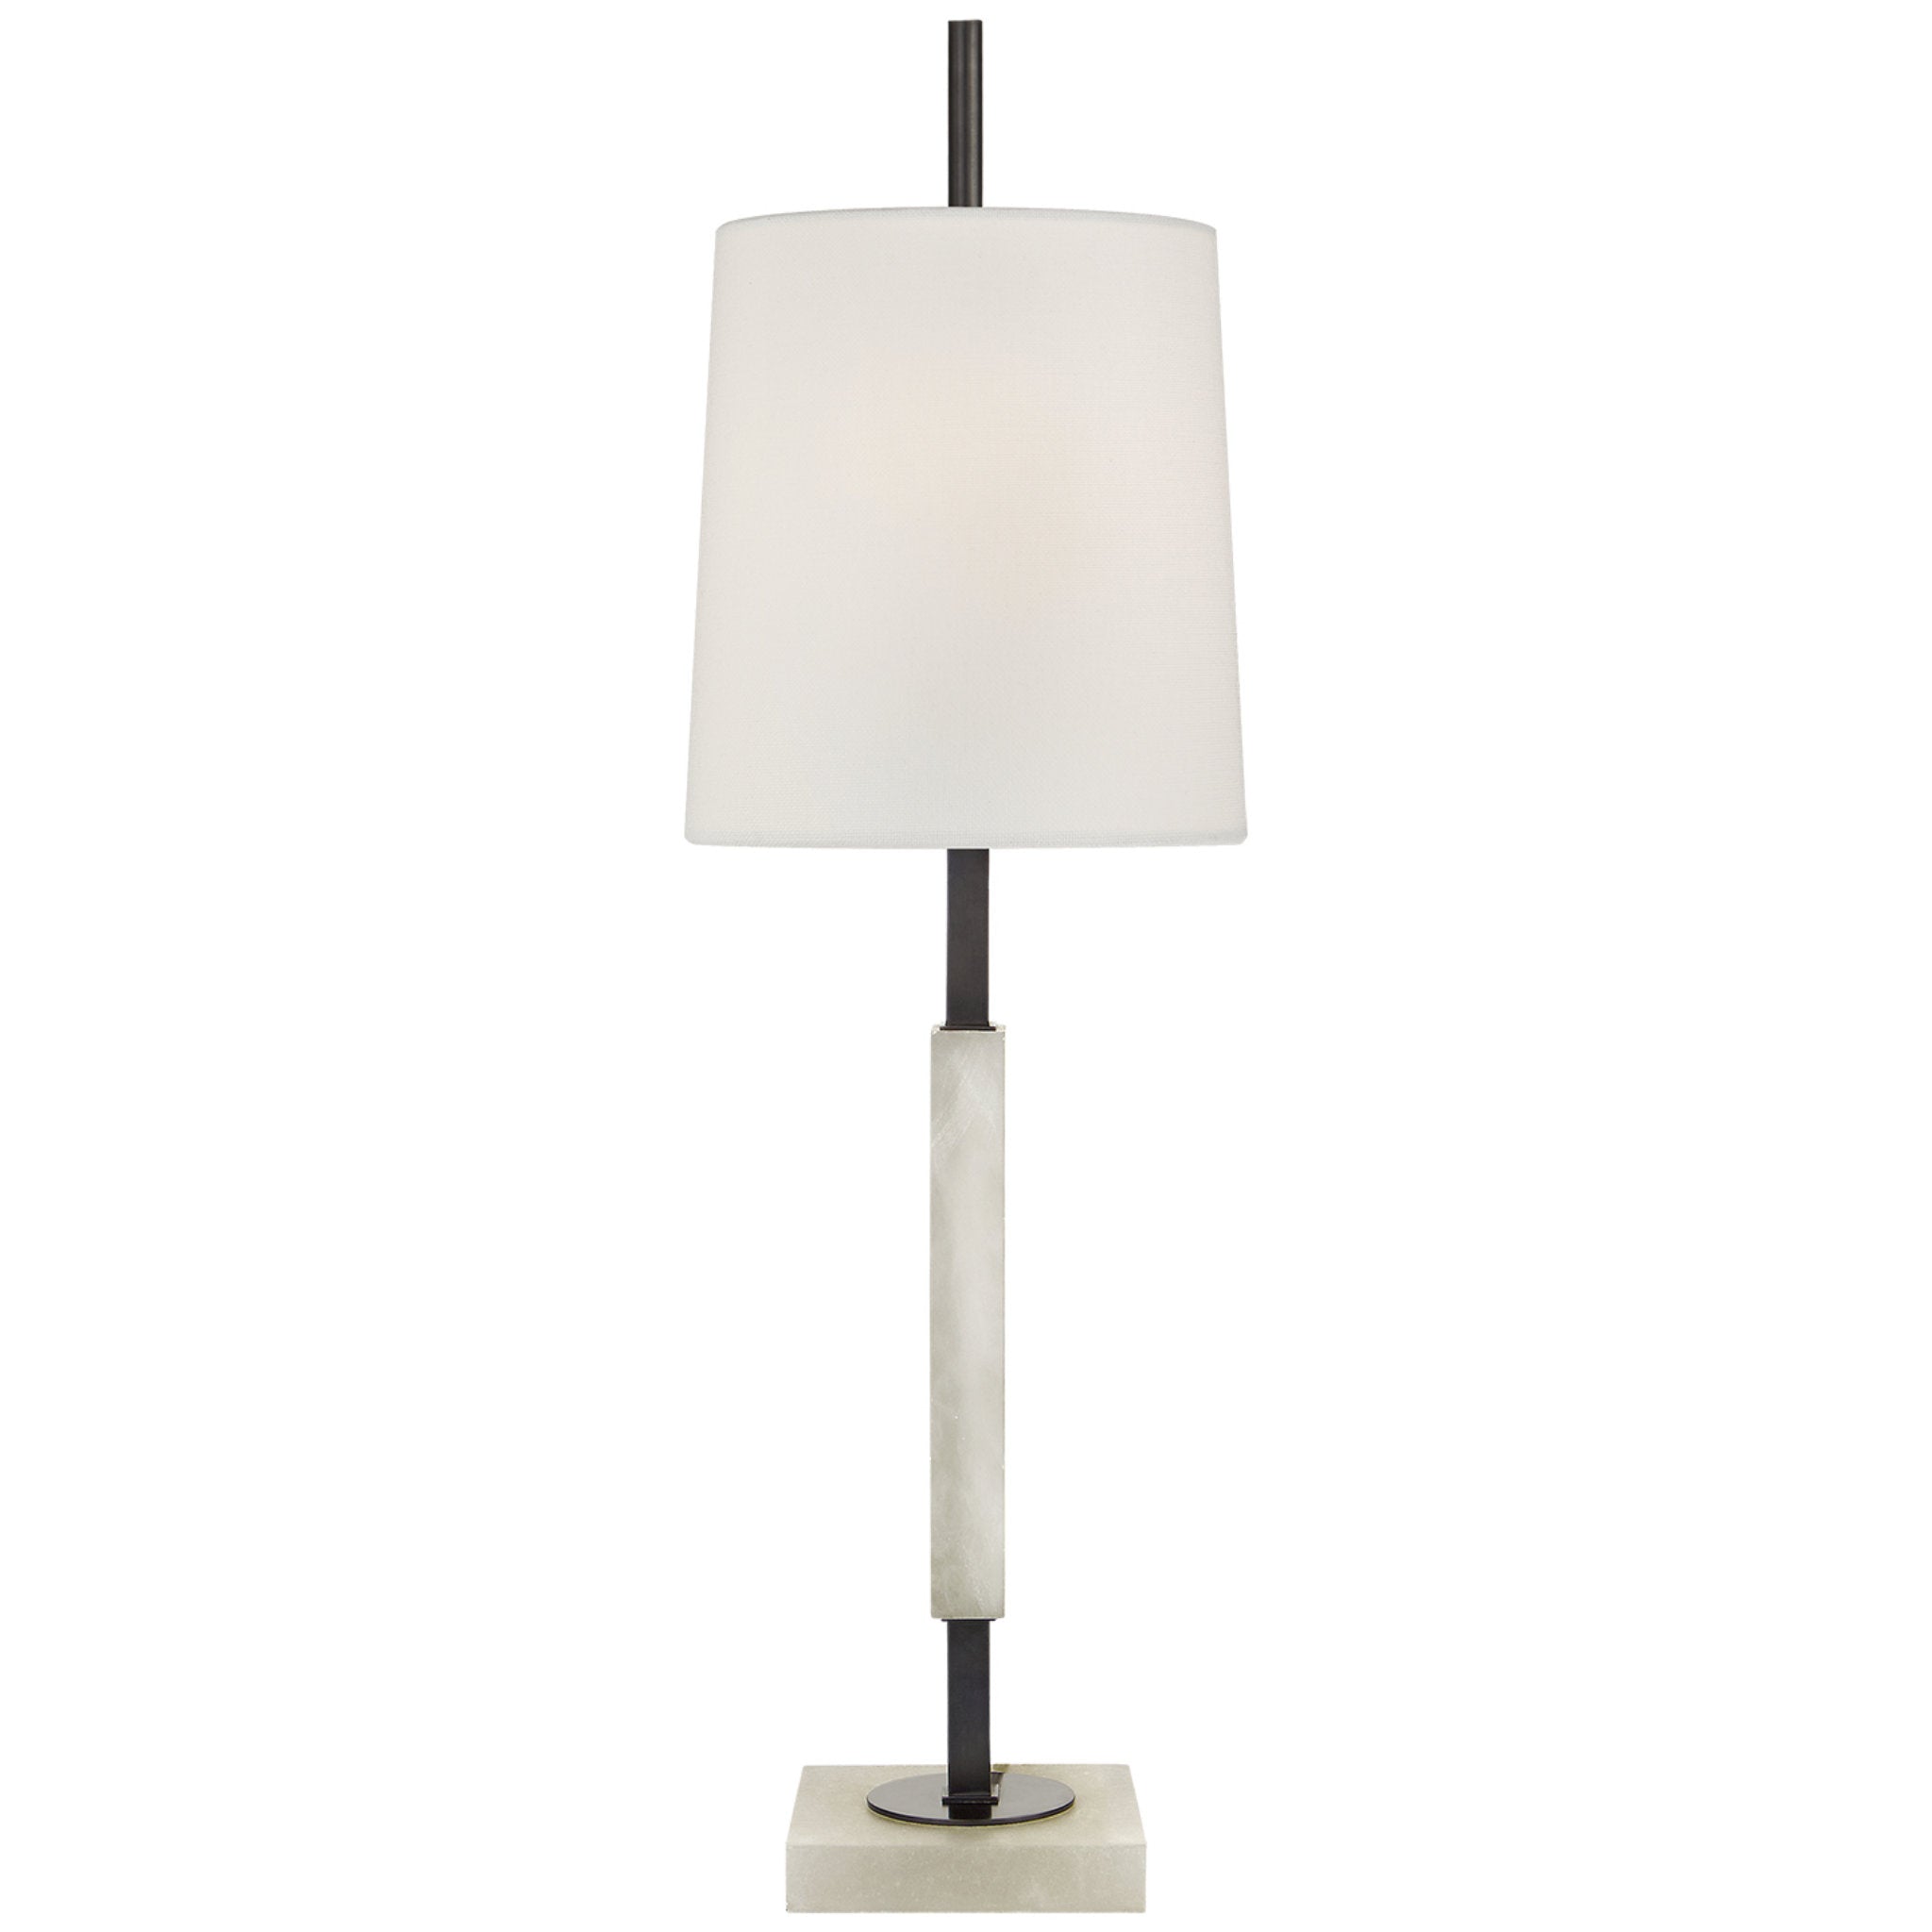 Thomas O'Brien Lexington Medium Table Lamp in Bronze and Alabaster with Linen Shade